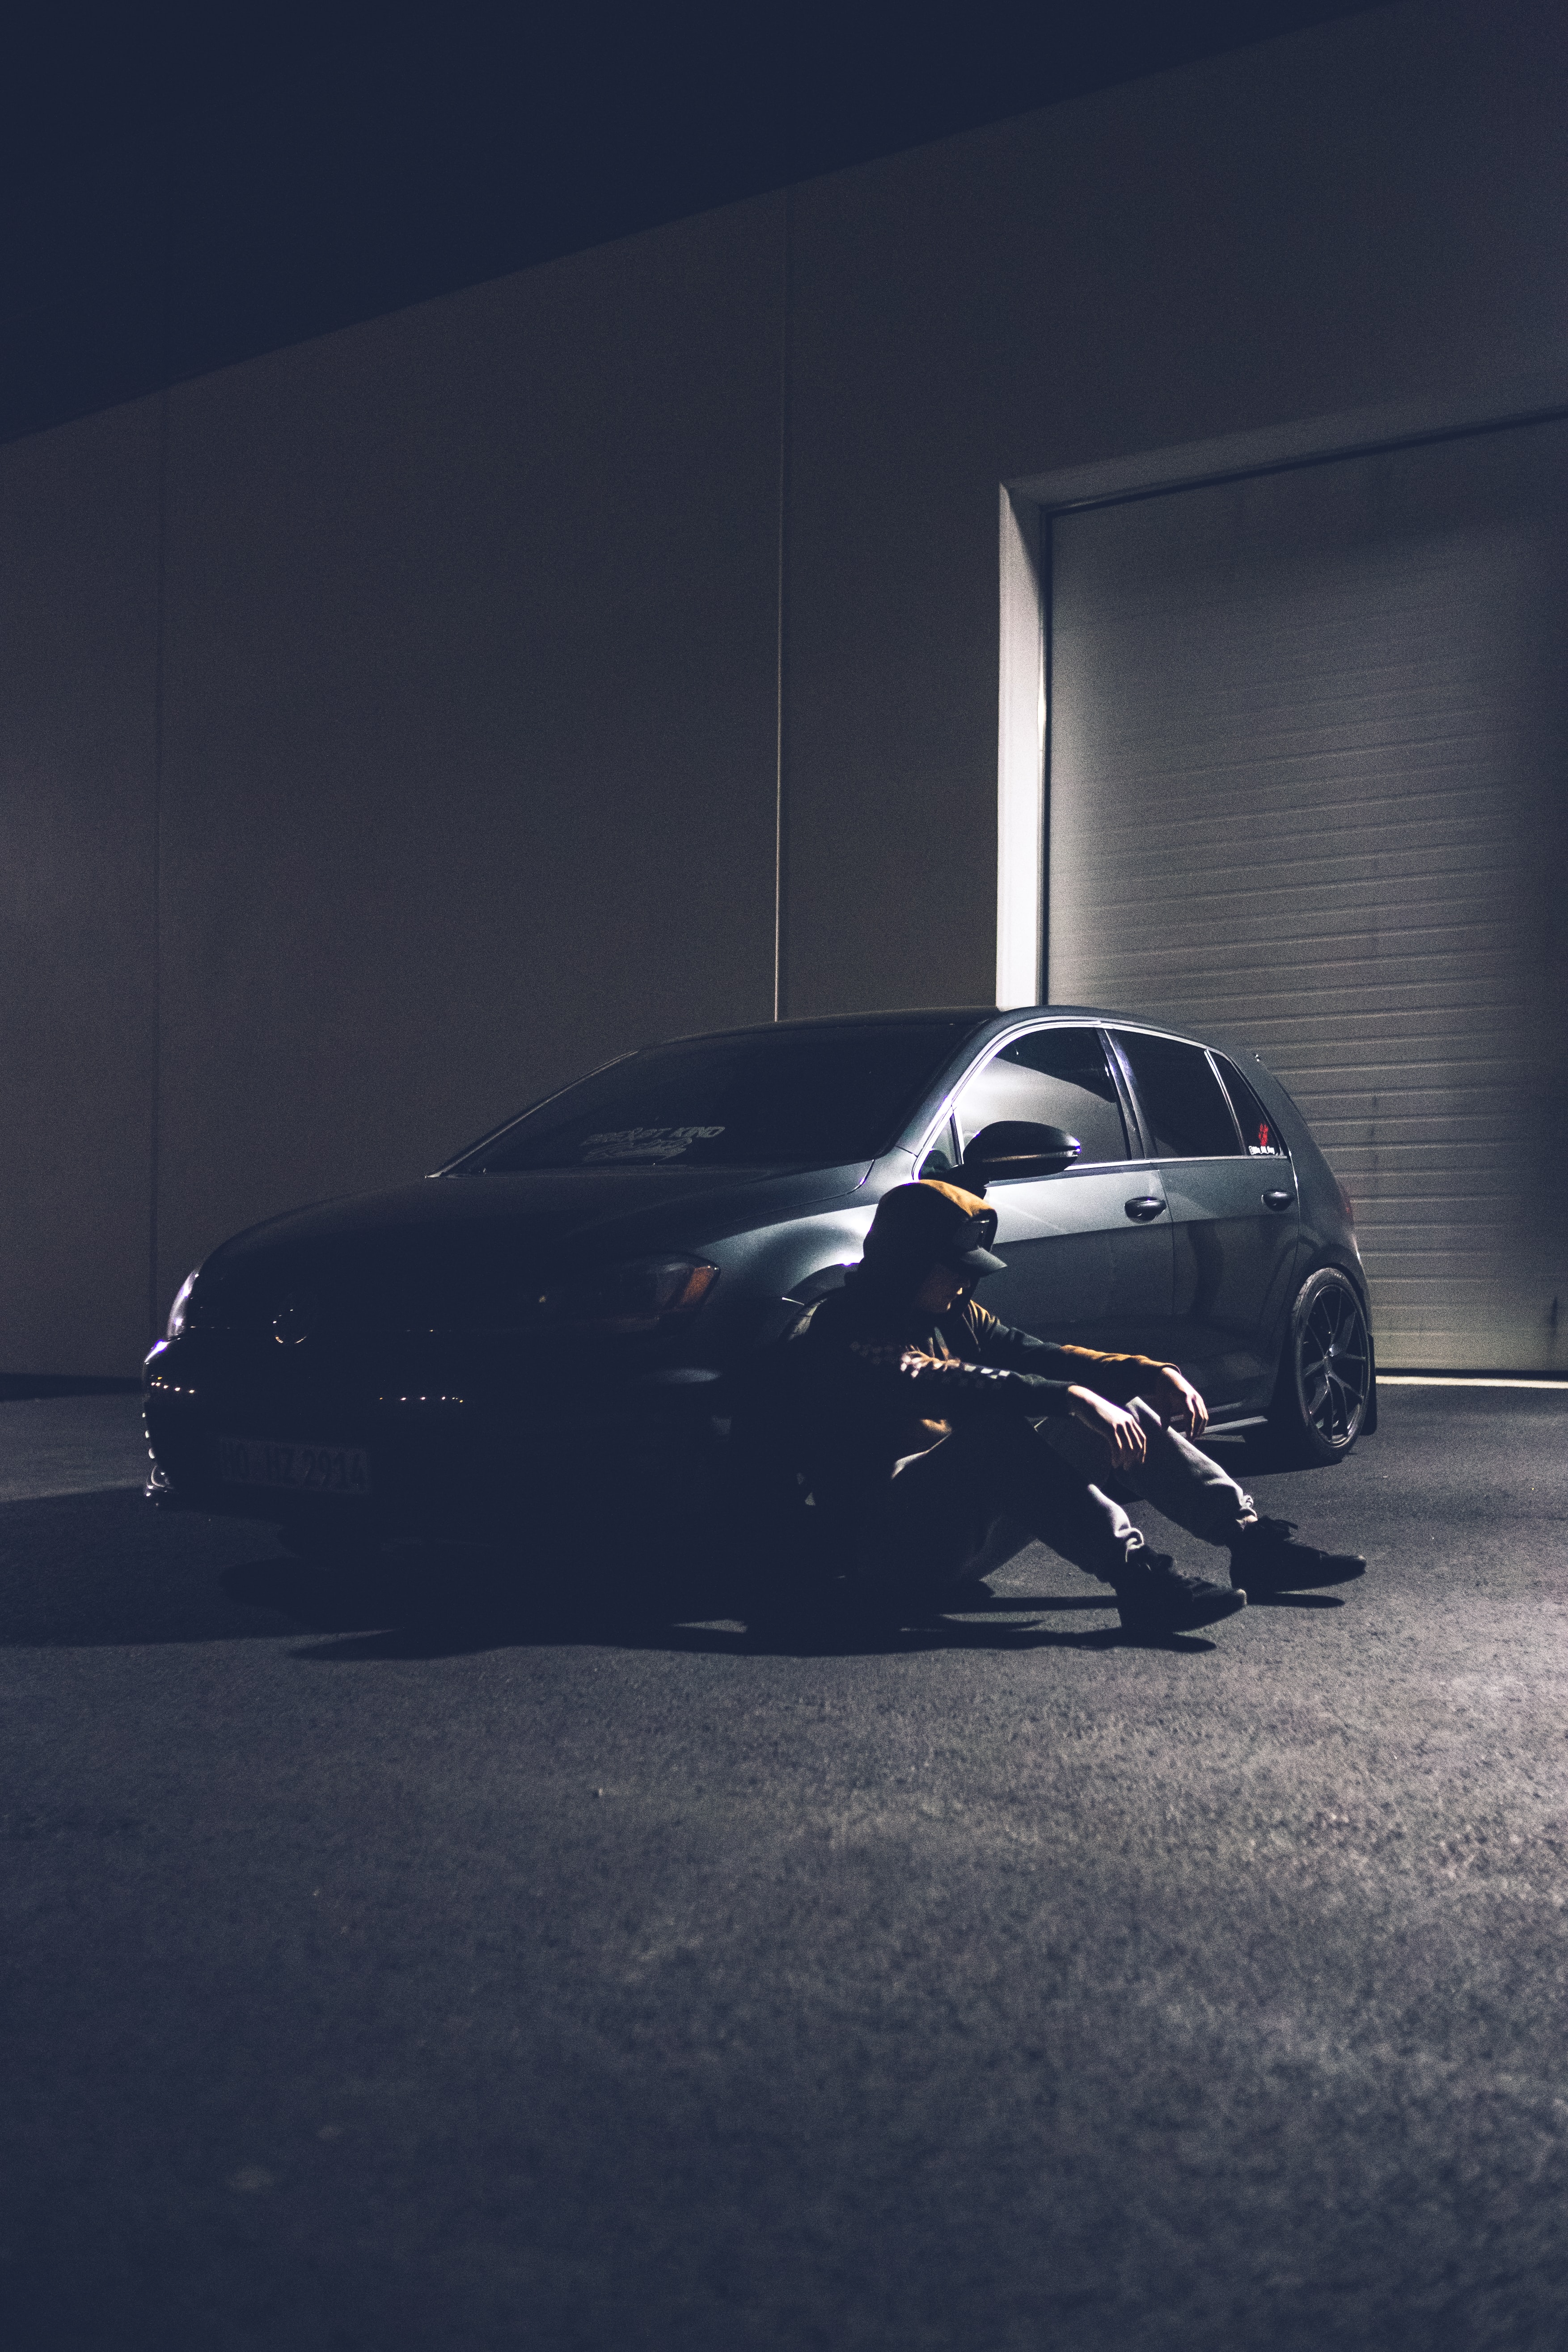 loneliness, alone, sadness, cars, car, machine, cap, lonely, sorrow UHD